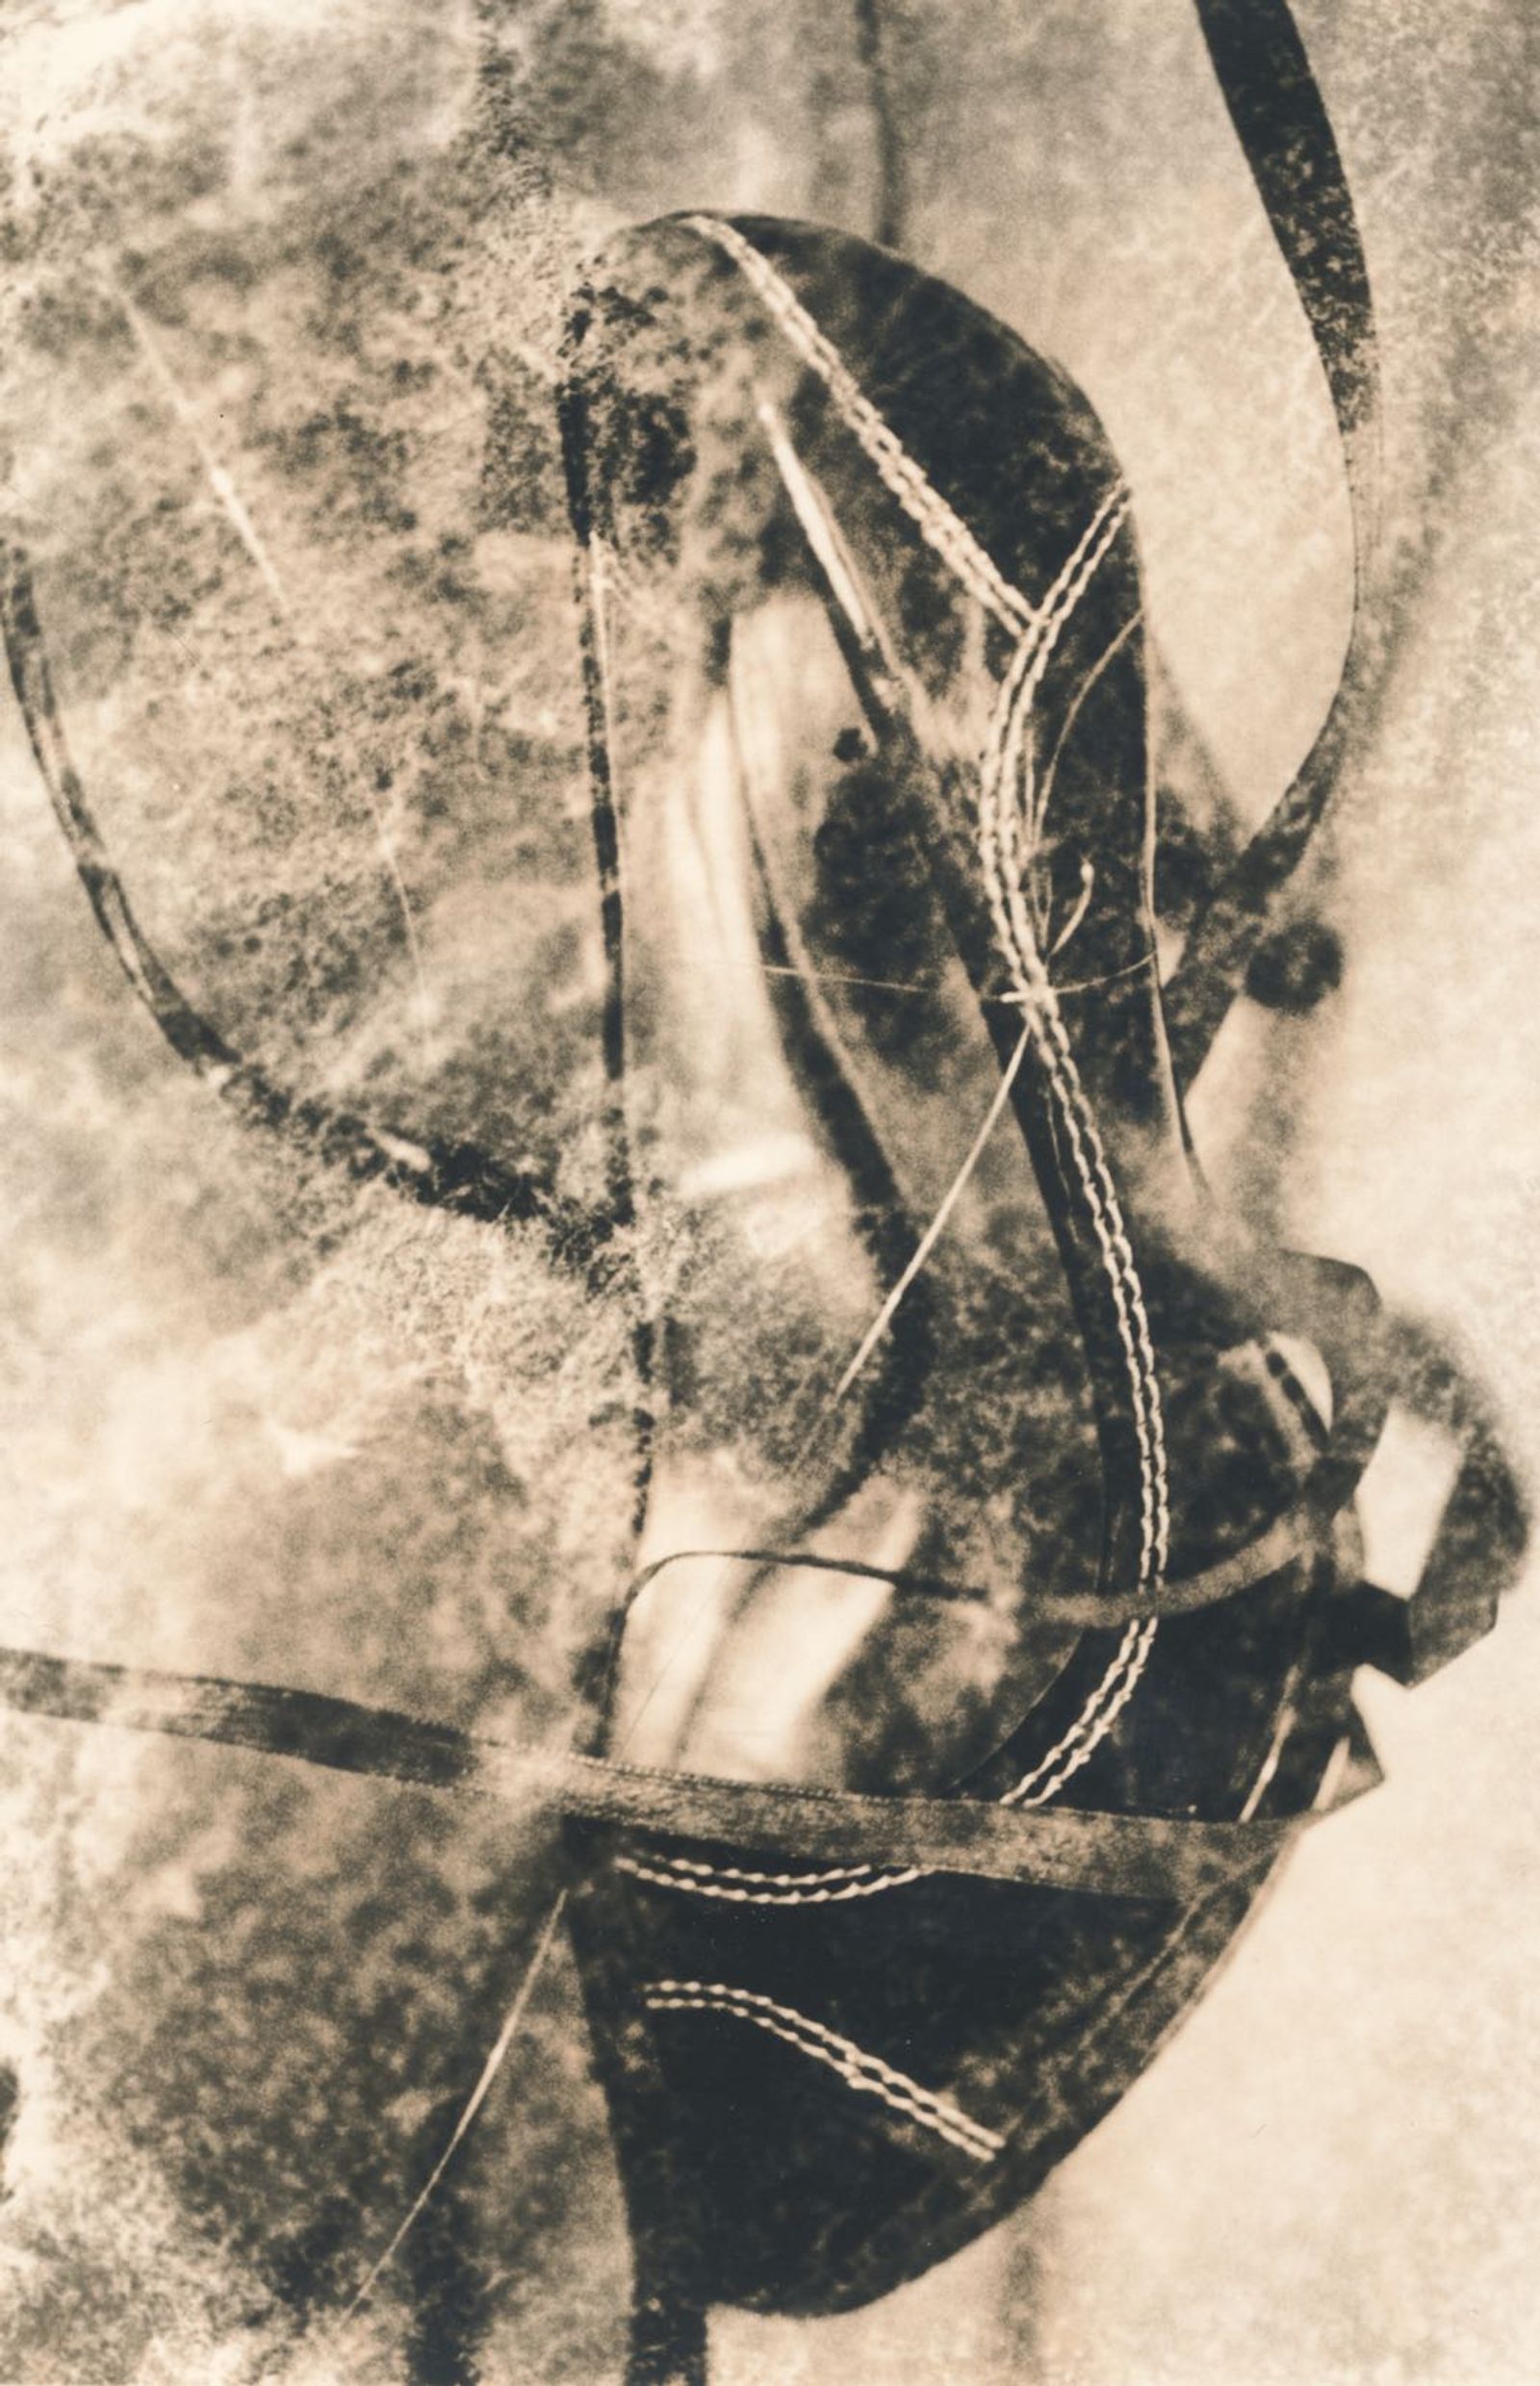 © Jo Stapleton - Flying shoe with ribbons. Shoe suspended with fishing wire. Lith print (negative distressed with tissue paper)